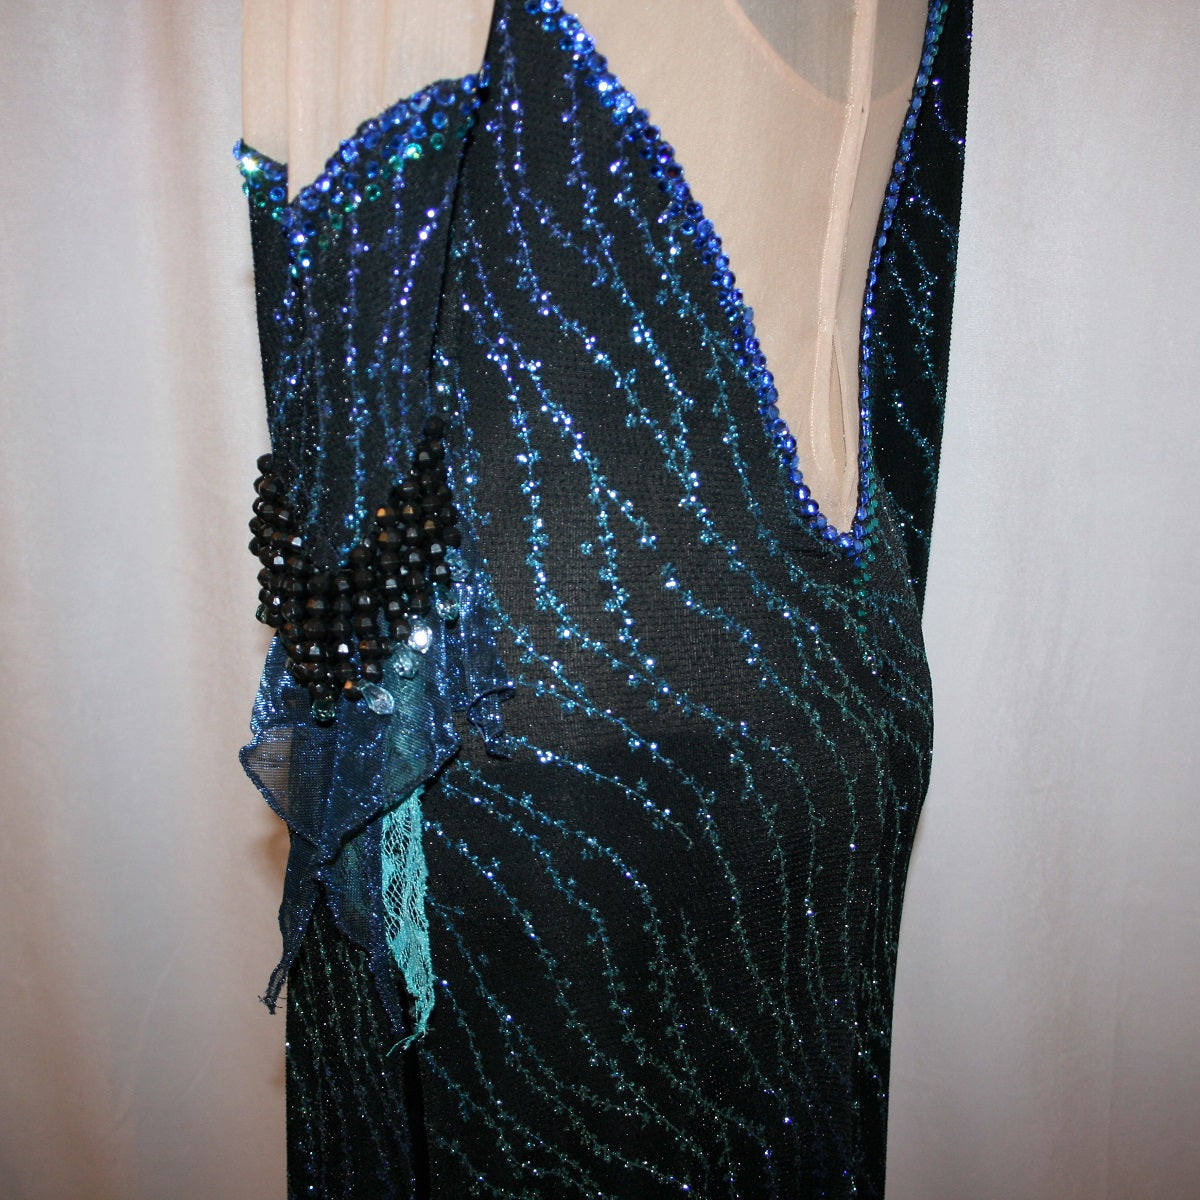 upper left side view of black Latin-rhythm dress sparkles plenty on the dance floor with a stunning black glitter fabric featuring a wavy turquoise, aqua & royal blue design, complete with black hand-beading, aqua teardrop shape beads, spangles, and intricate flounces in various fabrics of deep shimmering blue, turquoise, aqua & black. 